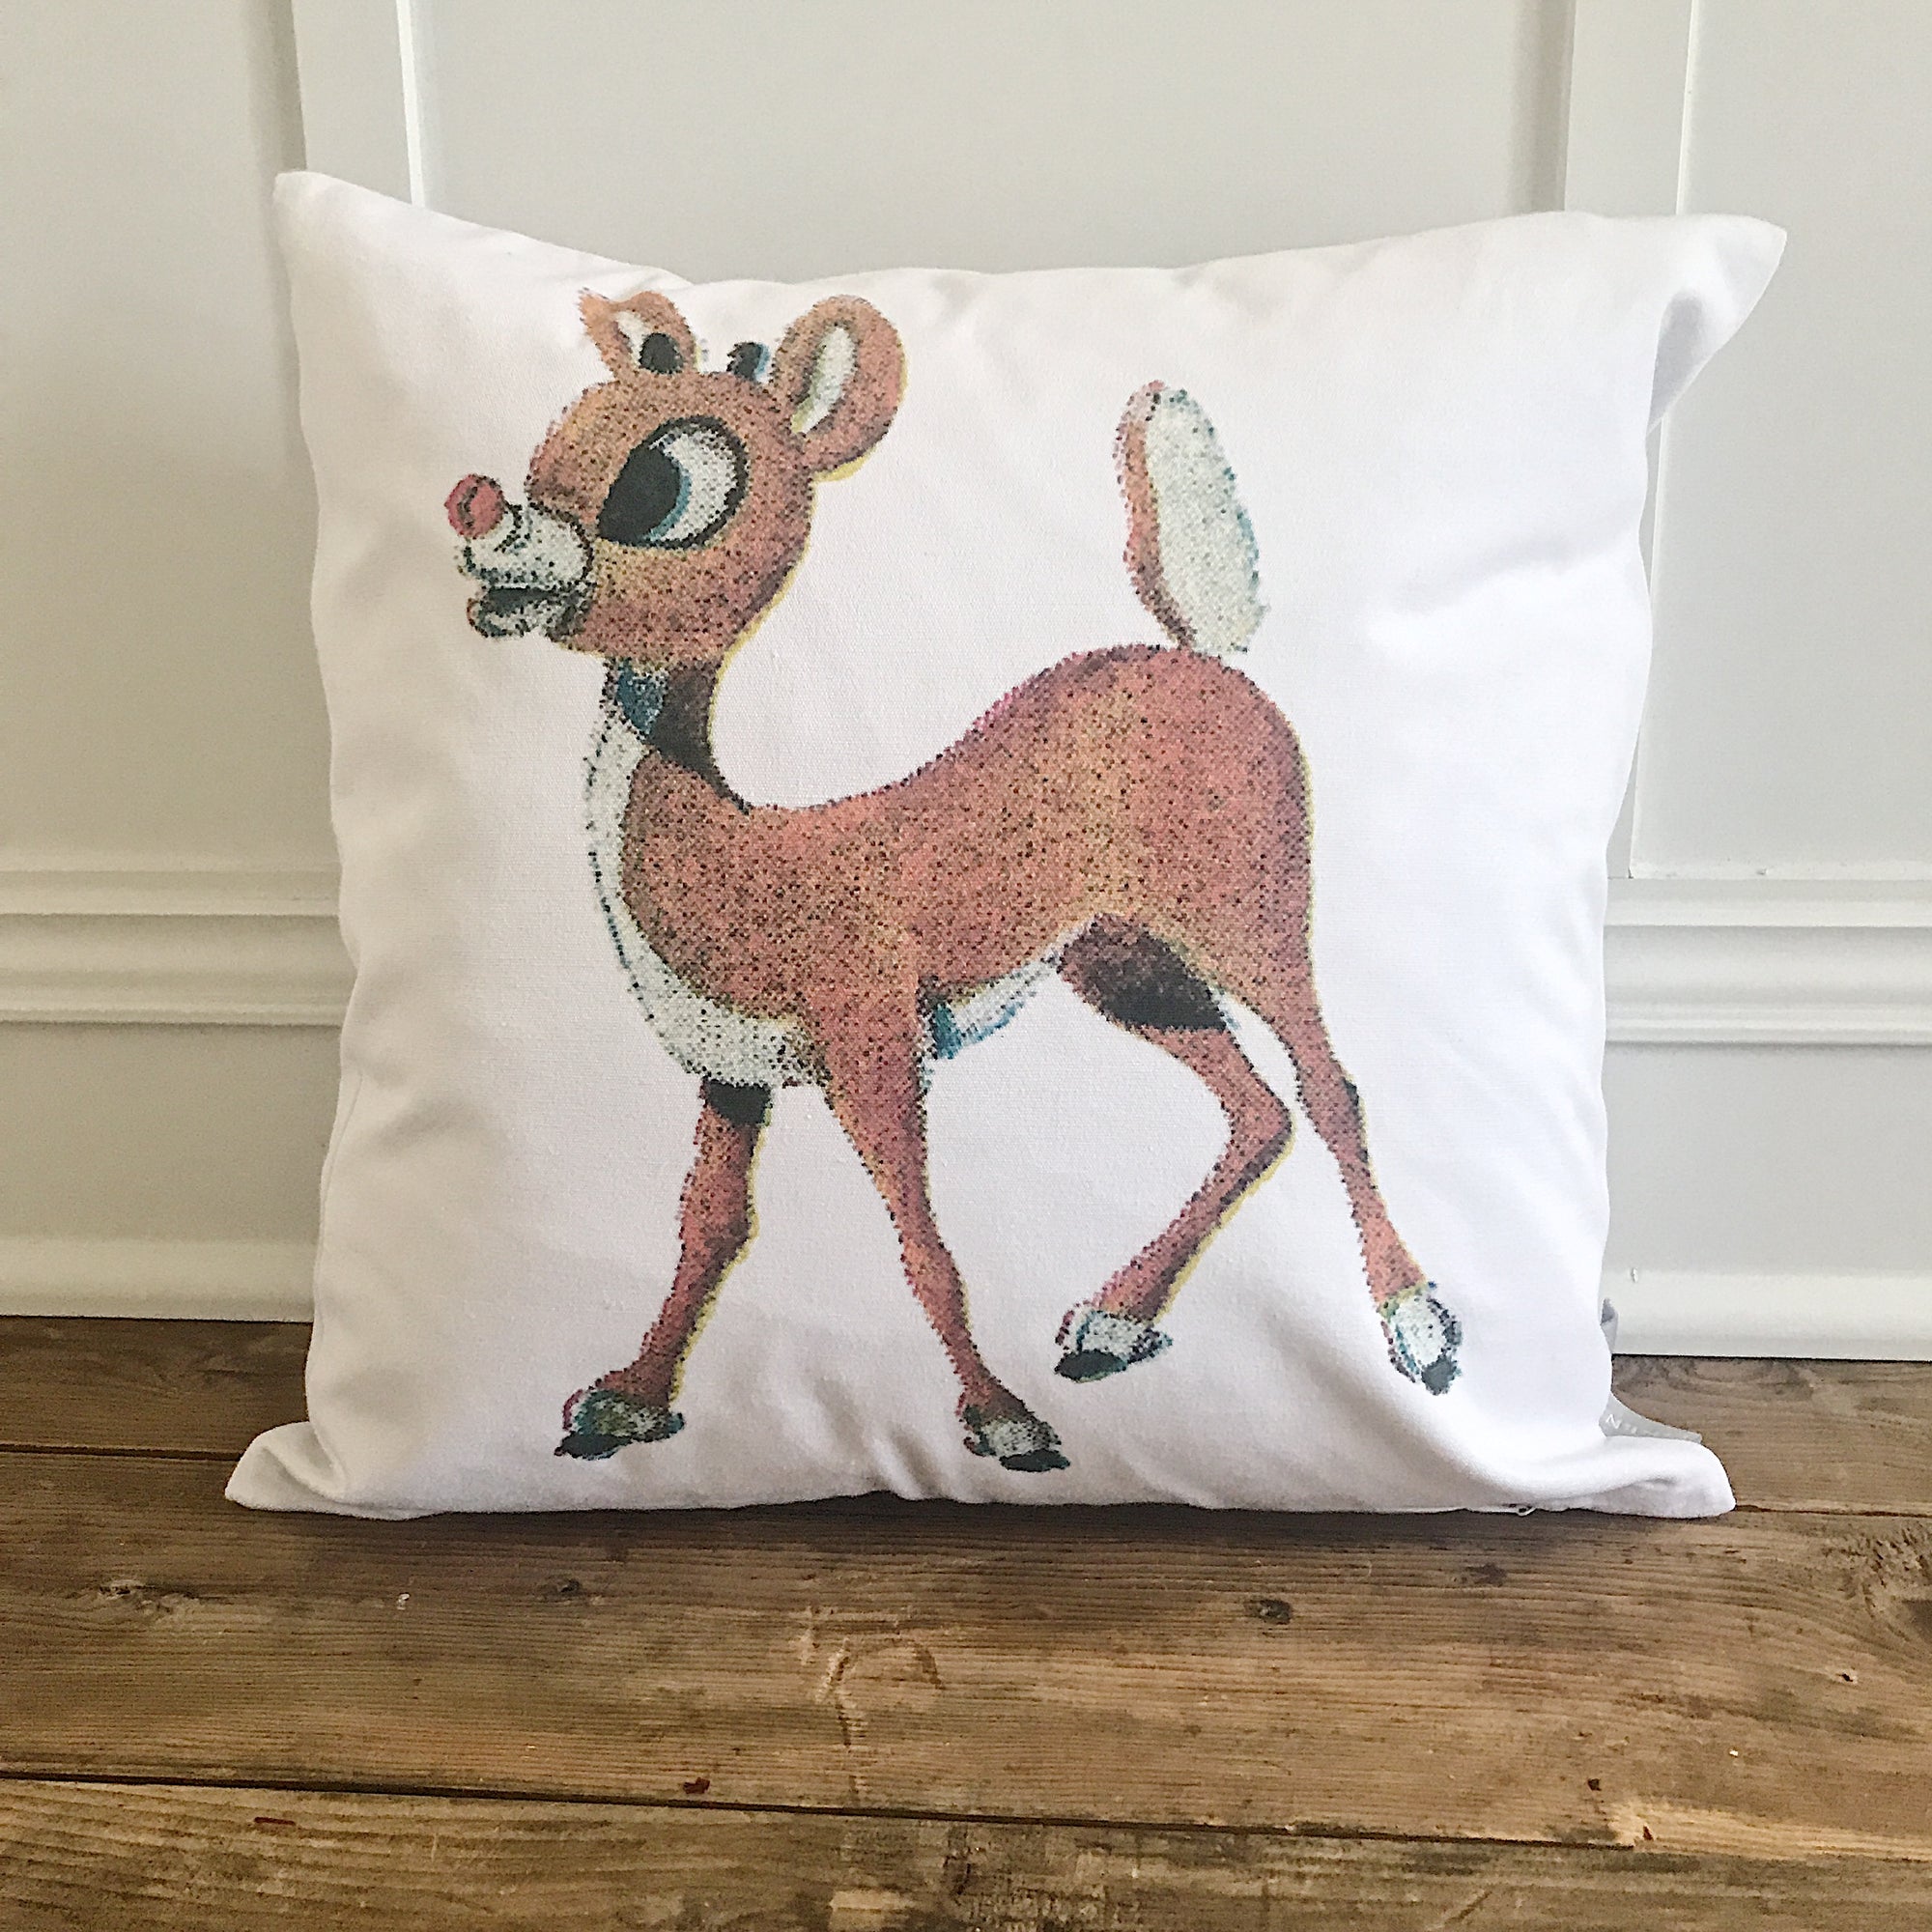 Vintage Rudolph Pillow Cover - Linen and Ivory